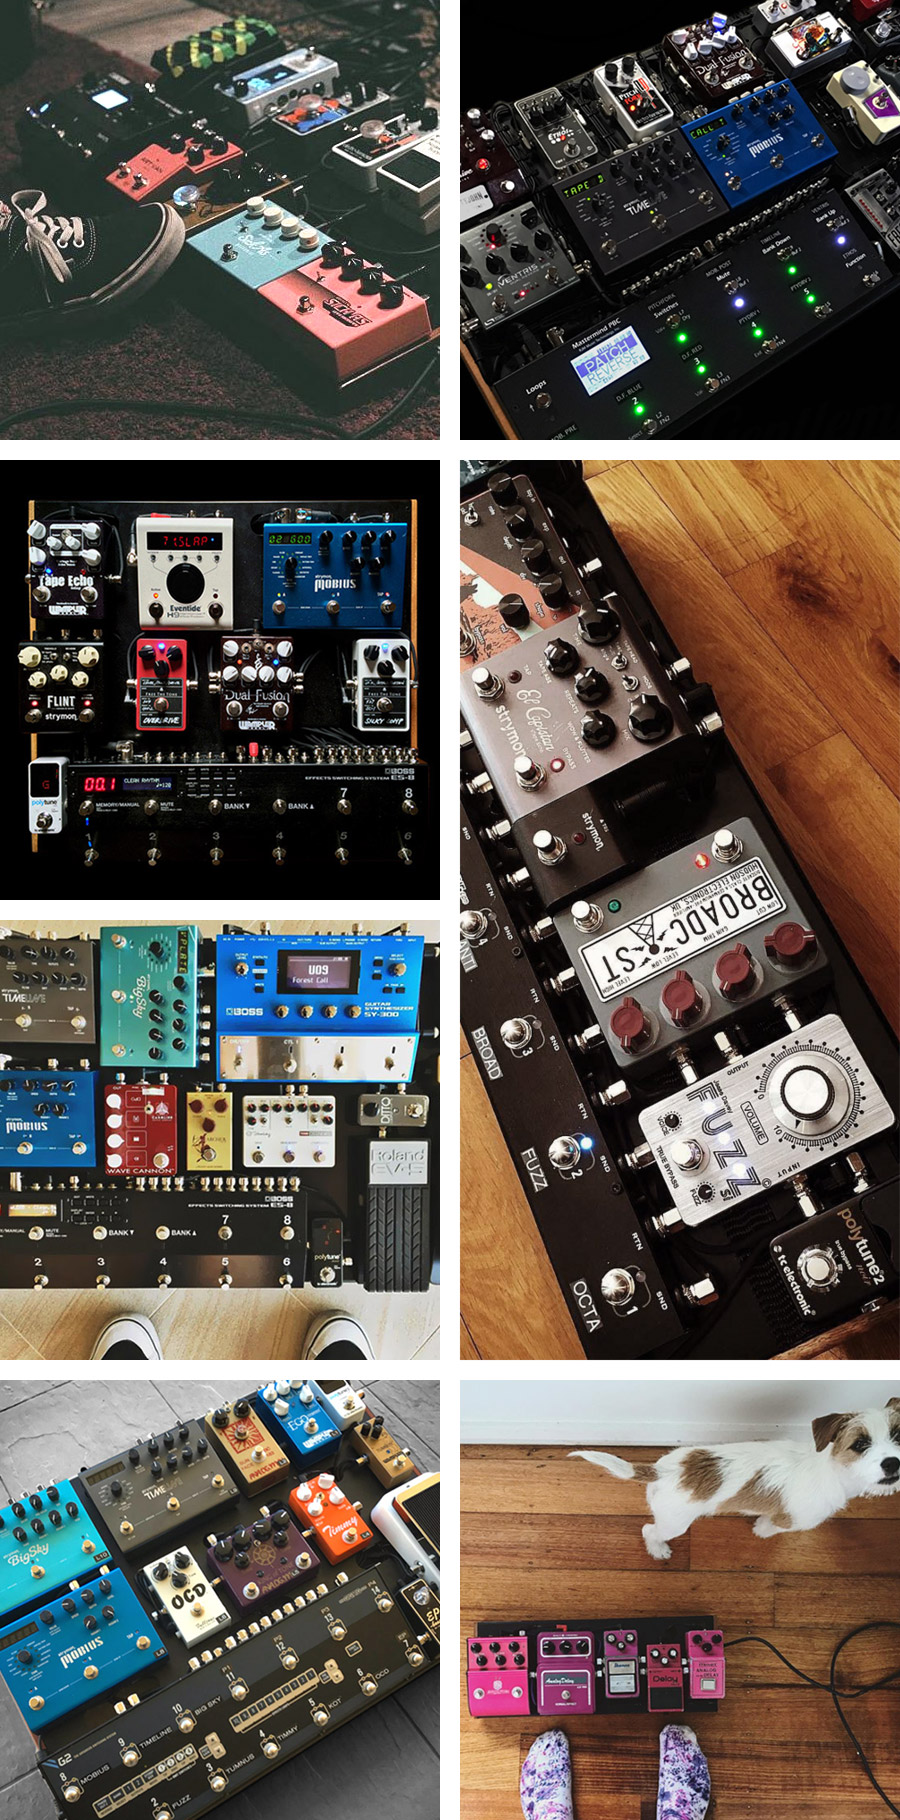 Australia's best pedalboards for Australia's best musicians both at home and on stage